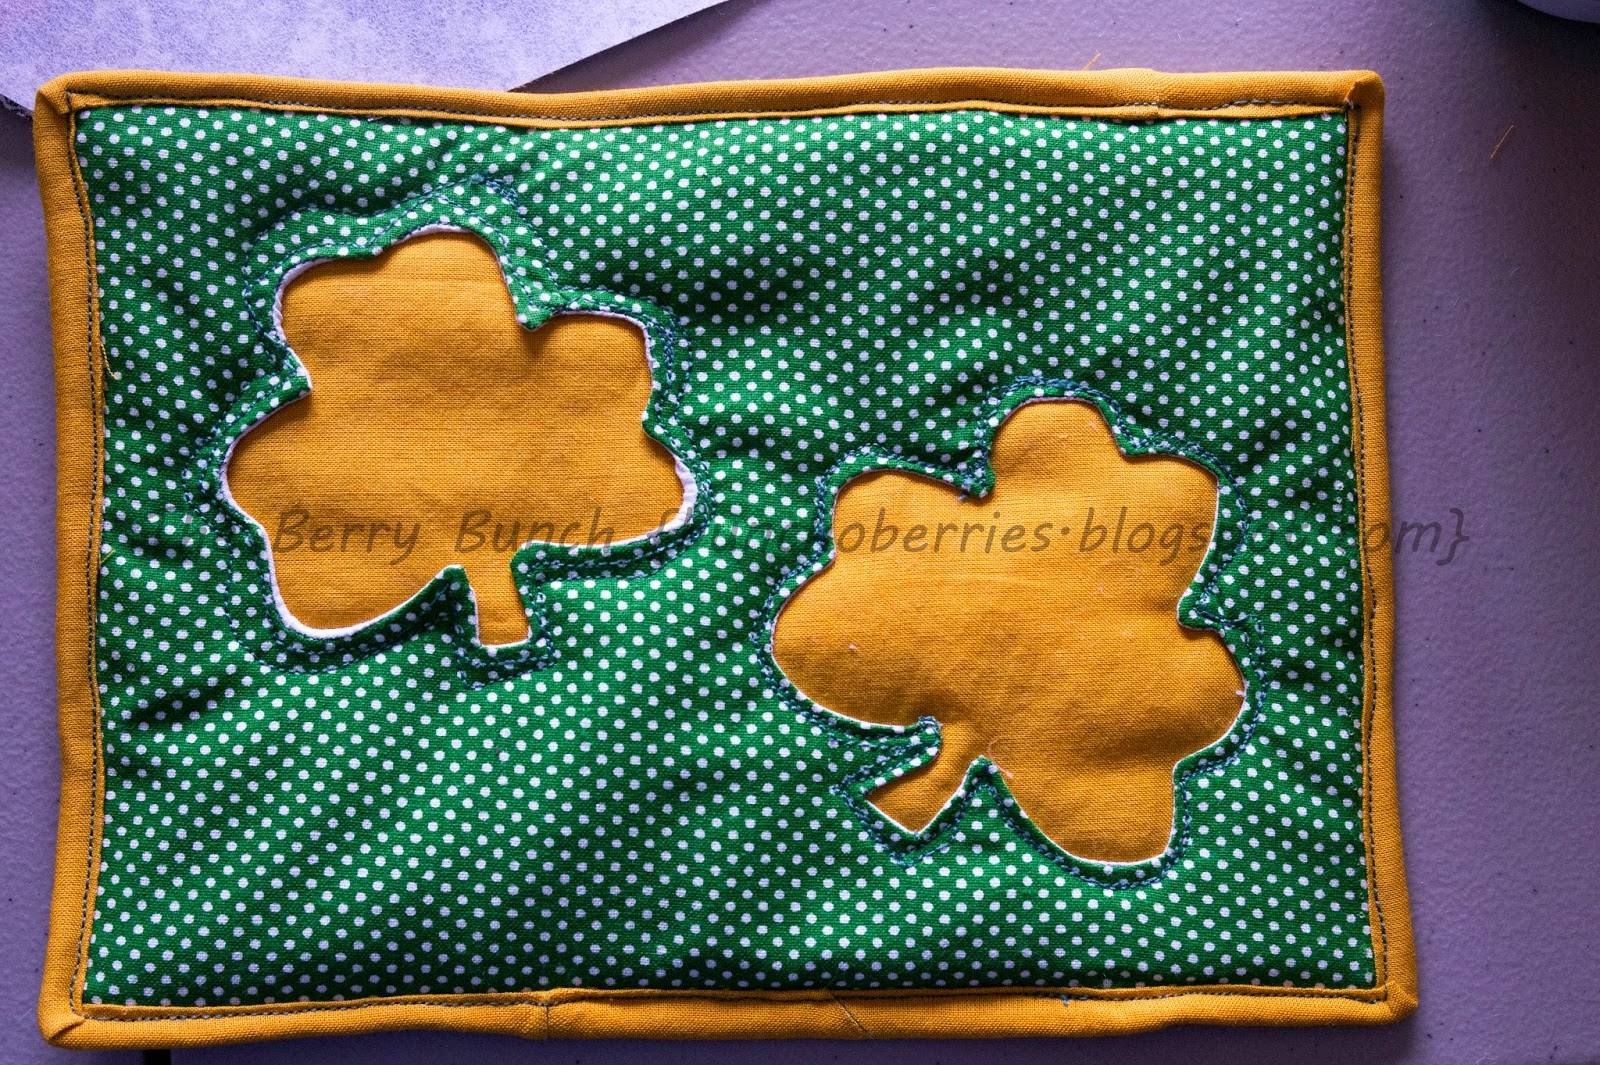 The Berry Bunch: Happy St. Patrick's Day: Shamrock Cut Out Mug Rug Tutorial